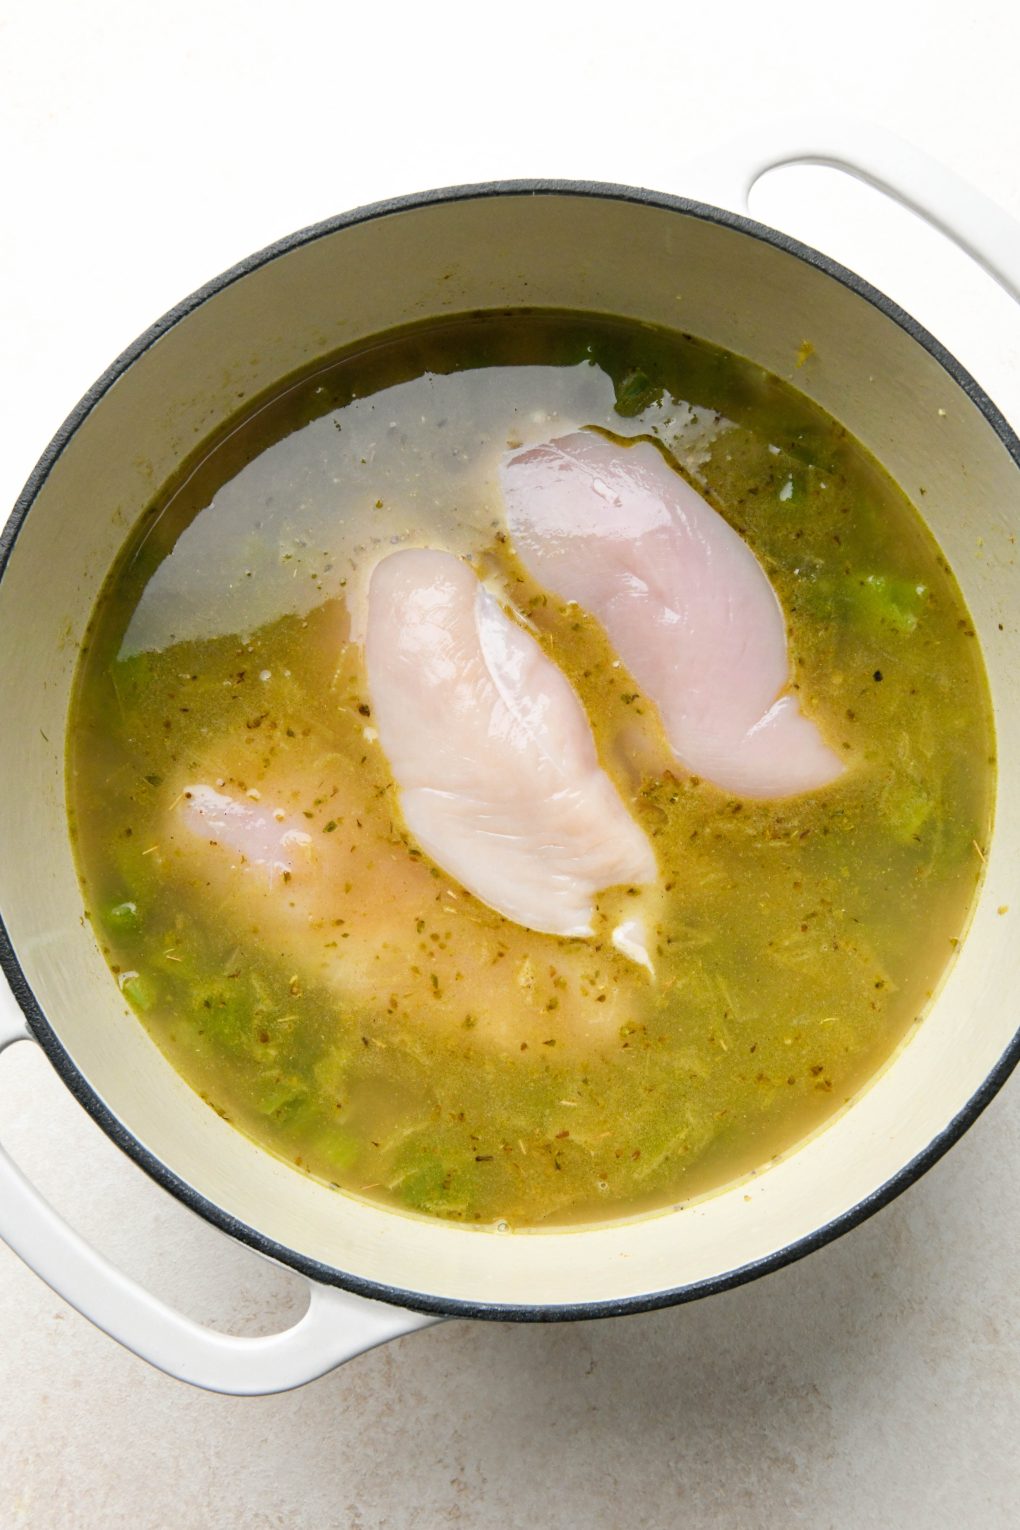 How to make Whole30 White Chicken Chili: Broth and boneless skinless chicken breasts added.